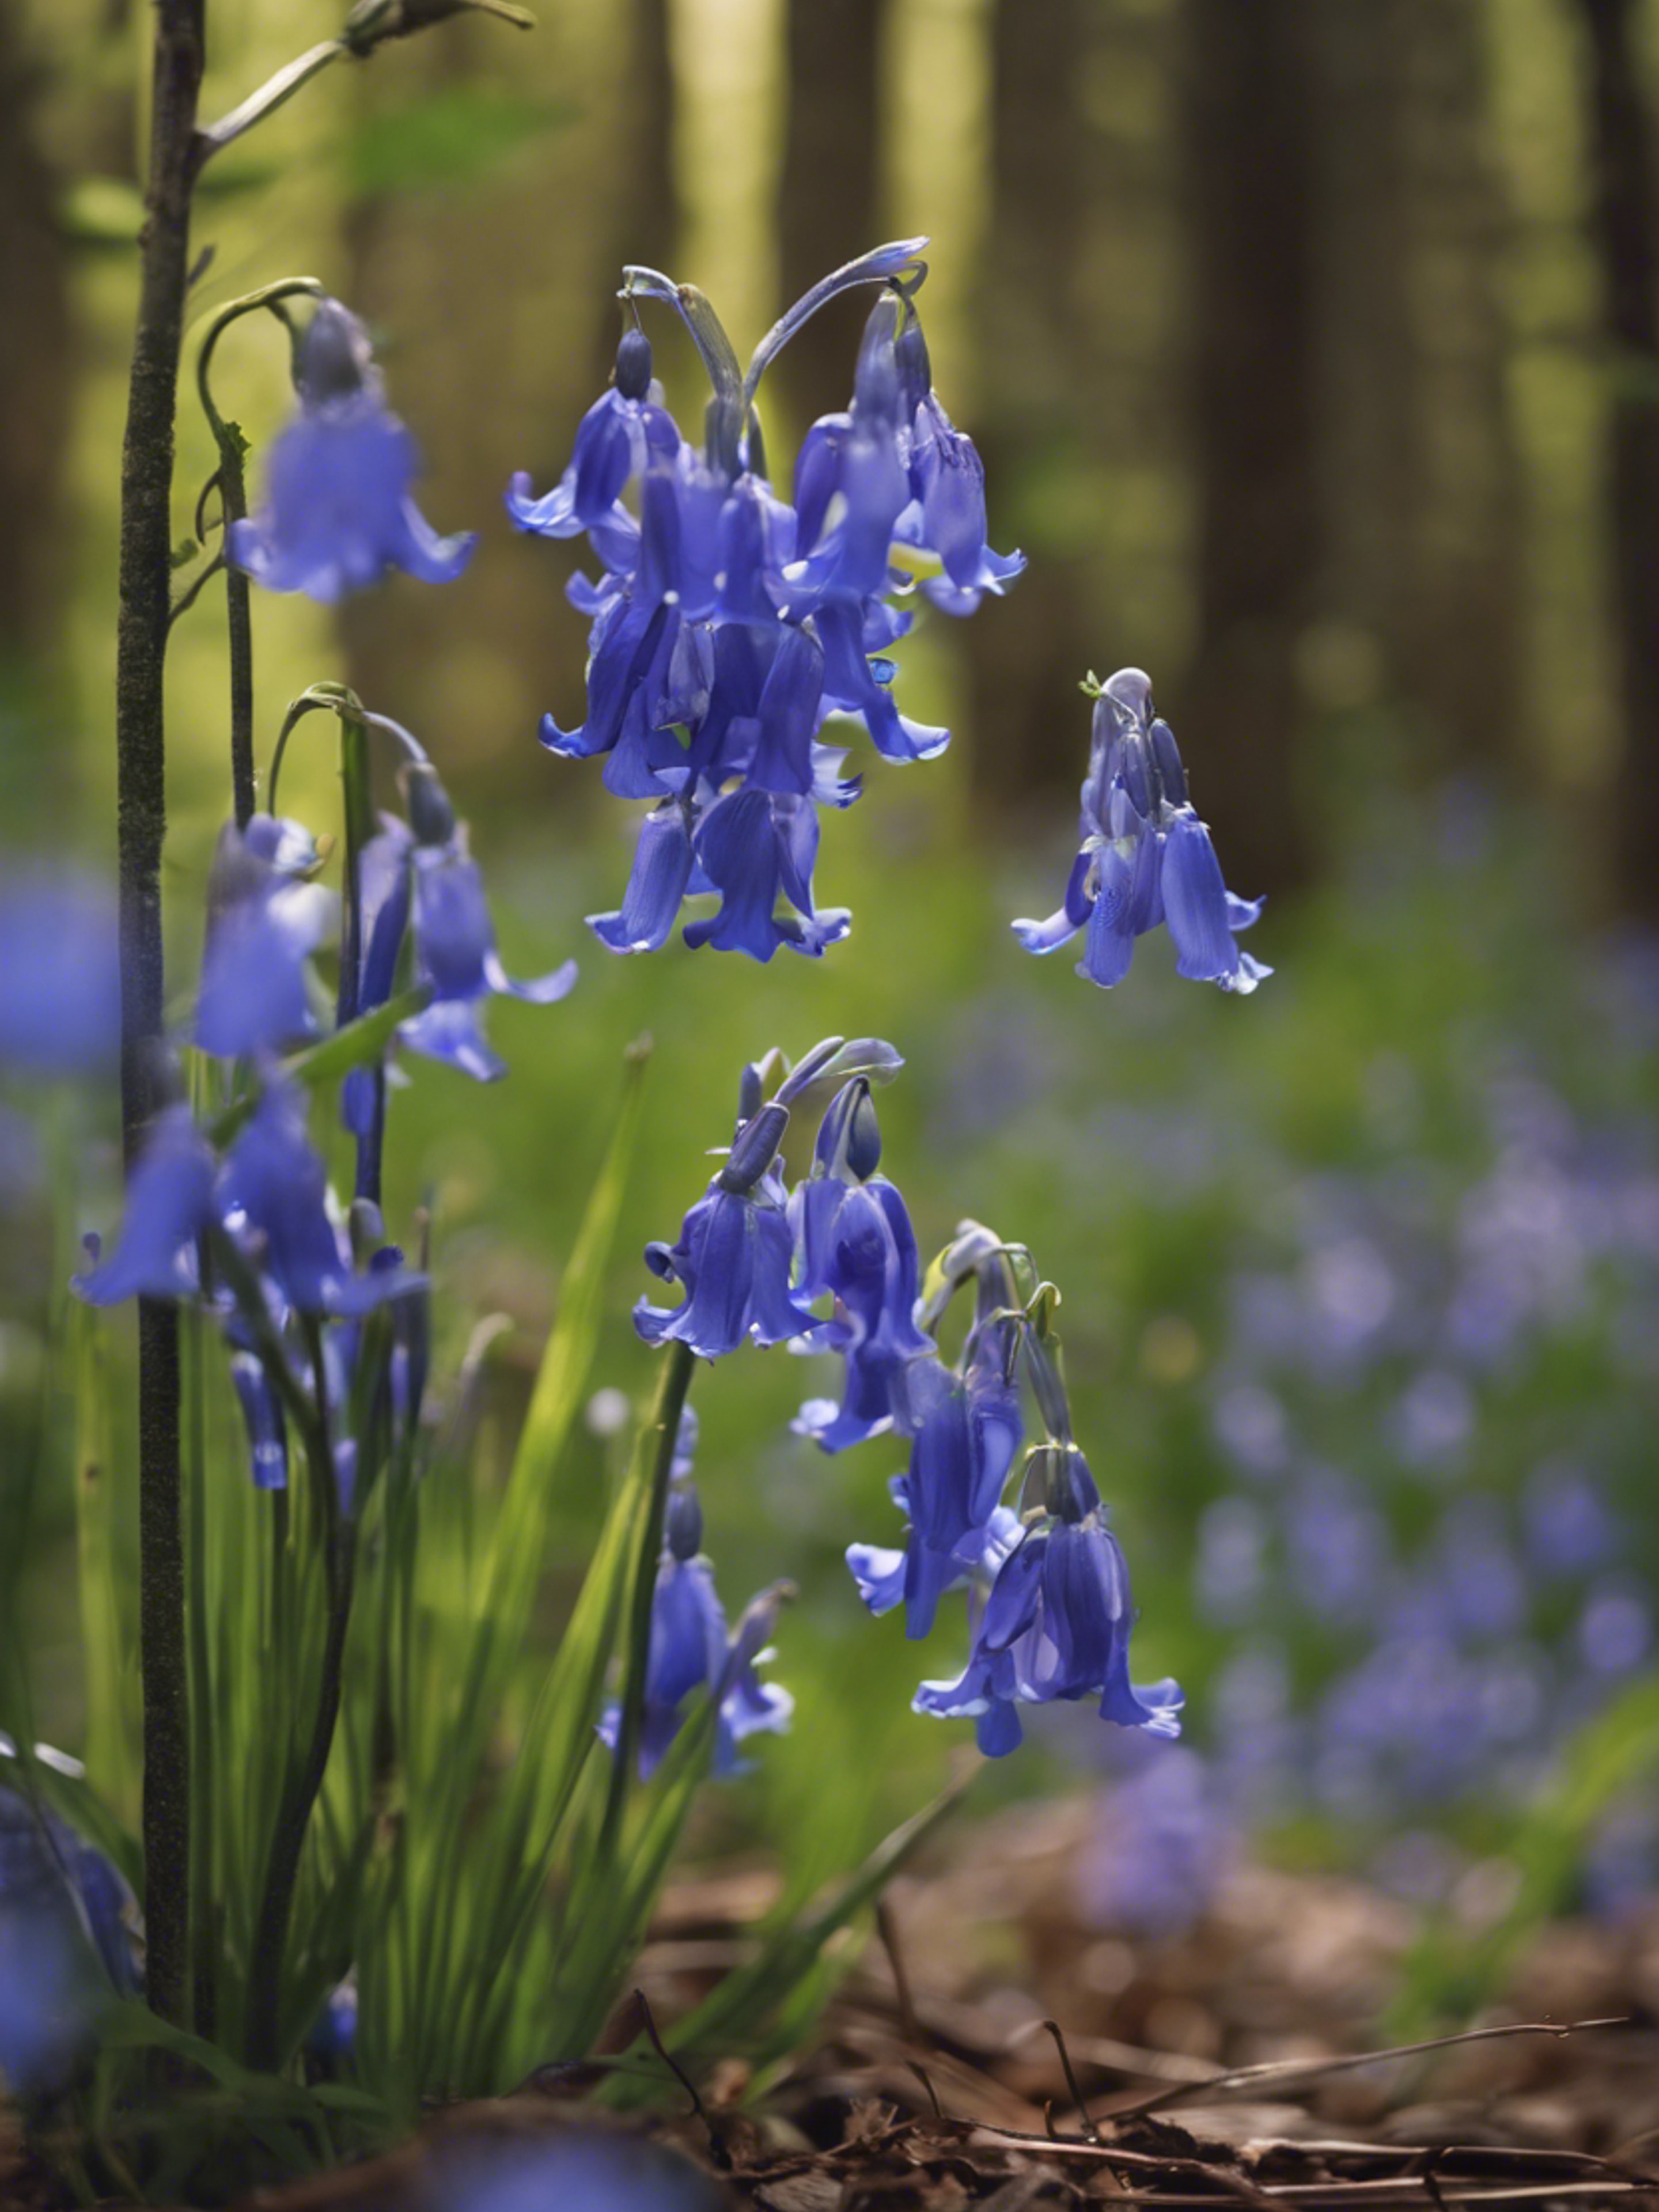 A cluster of bluebells growing in the heart of a dense, untouched forest. Wallpaper[e9ac2ad9f62f40e2a0af]